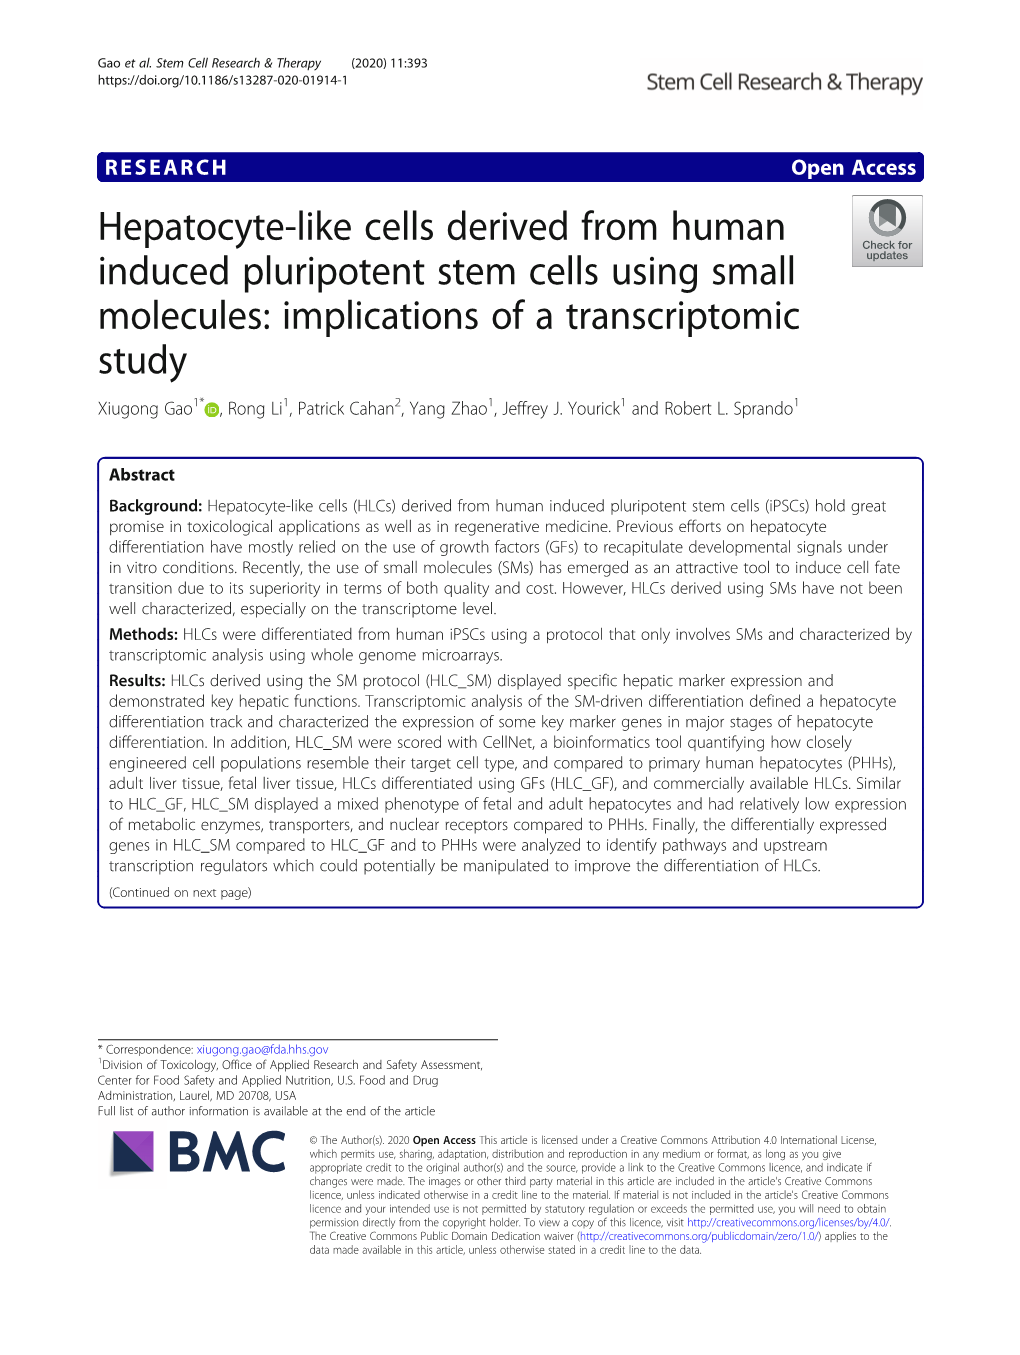 Hepatocyte-Like Cells Derived from Human Induced Pluripotent Stem